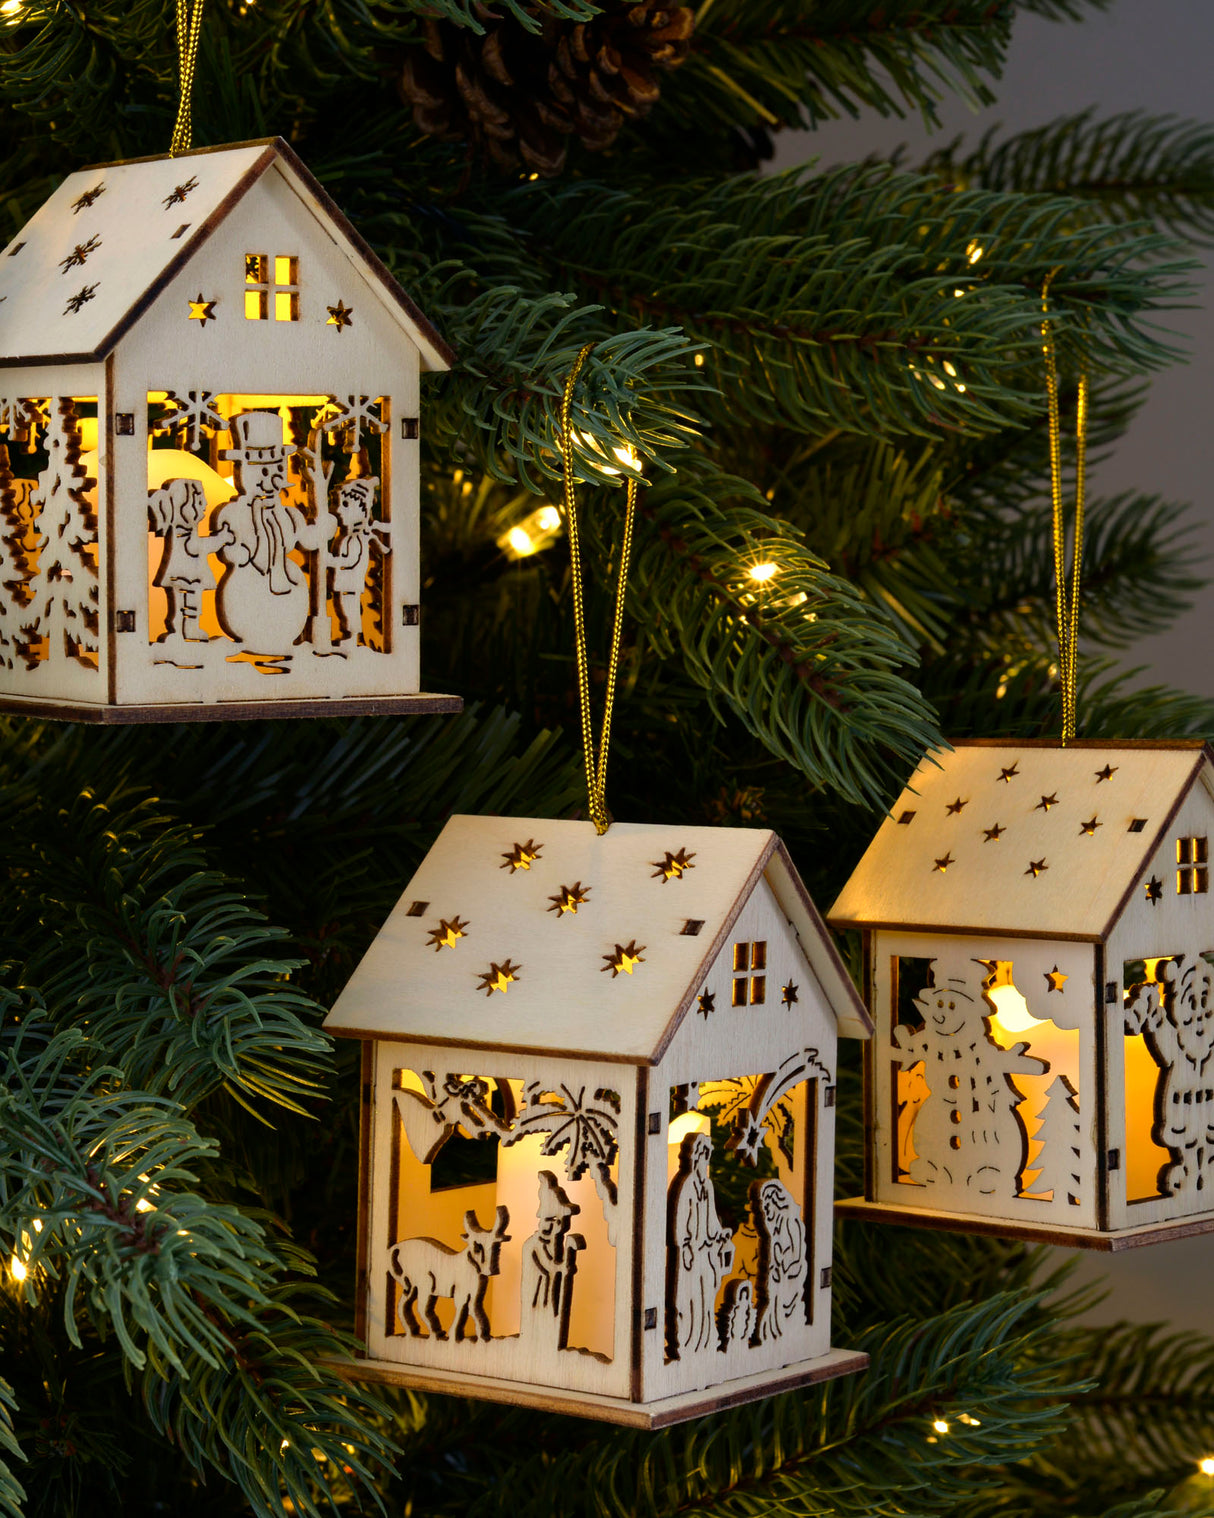 Pre-Lit Set of 3 Wooden House Tree Decorations